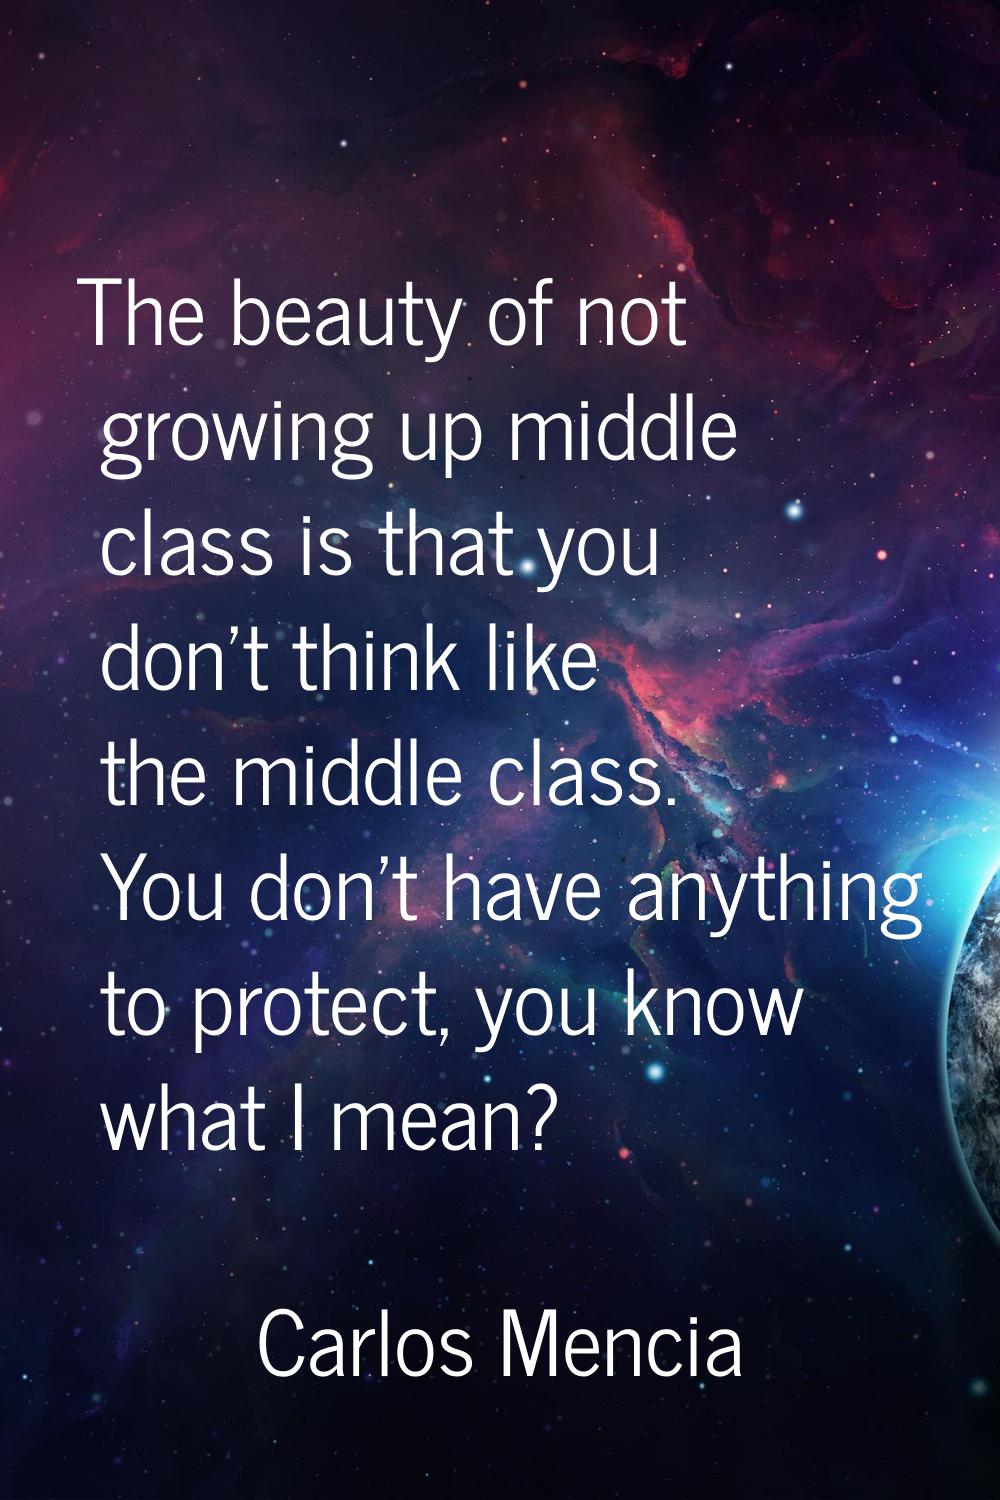 The beauty of not growing up middle class is that you don't think like the middle class. You don't 